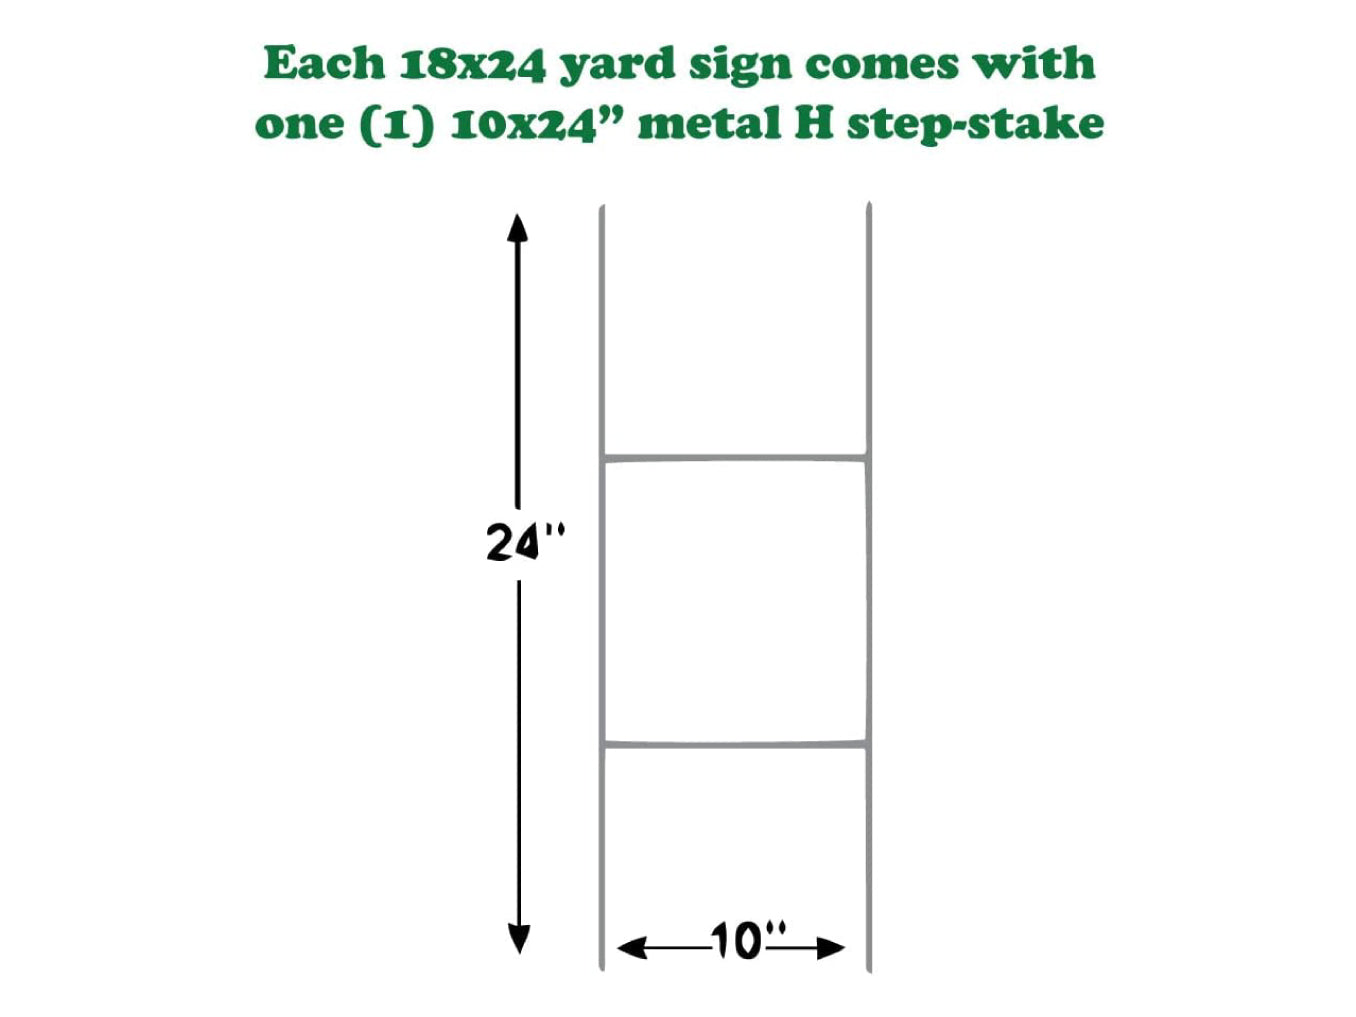 Cat Crossing Yard Sign, Double Sided, H-Stake Included, 18x12, 24x18, 36x24, v2